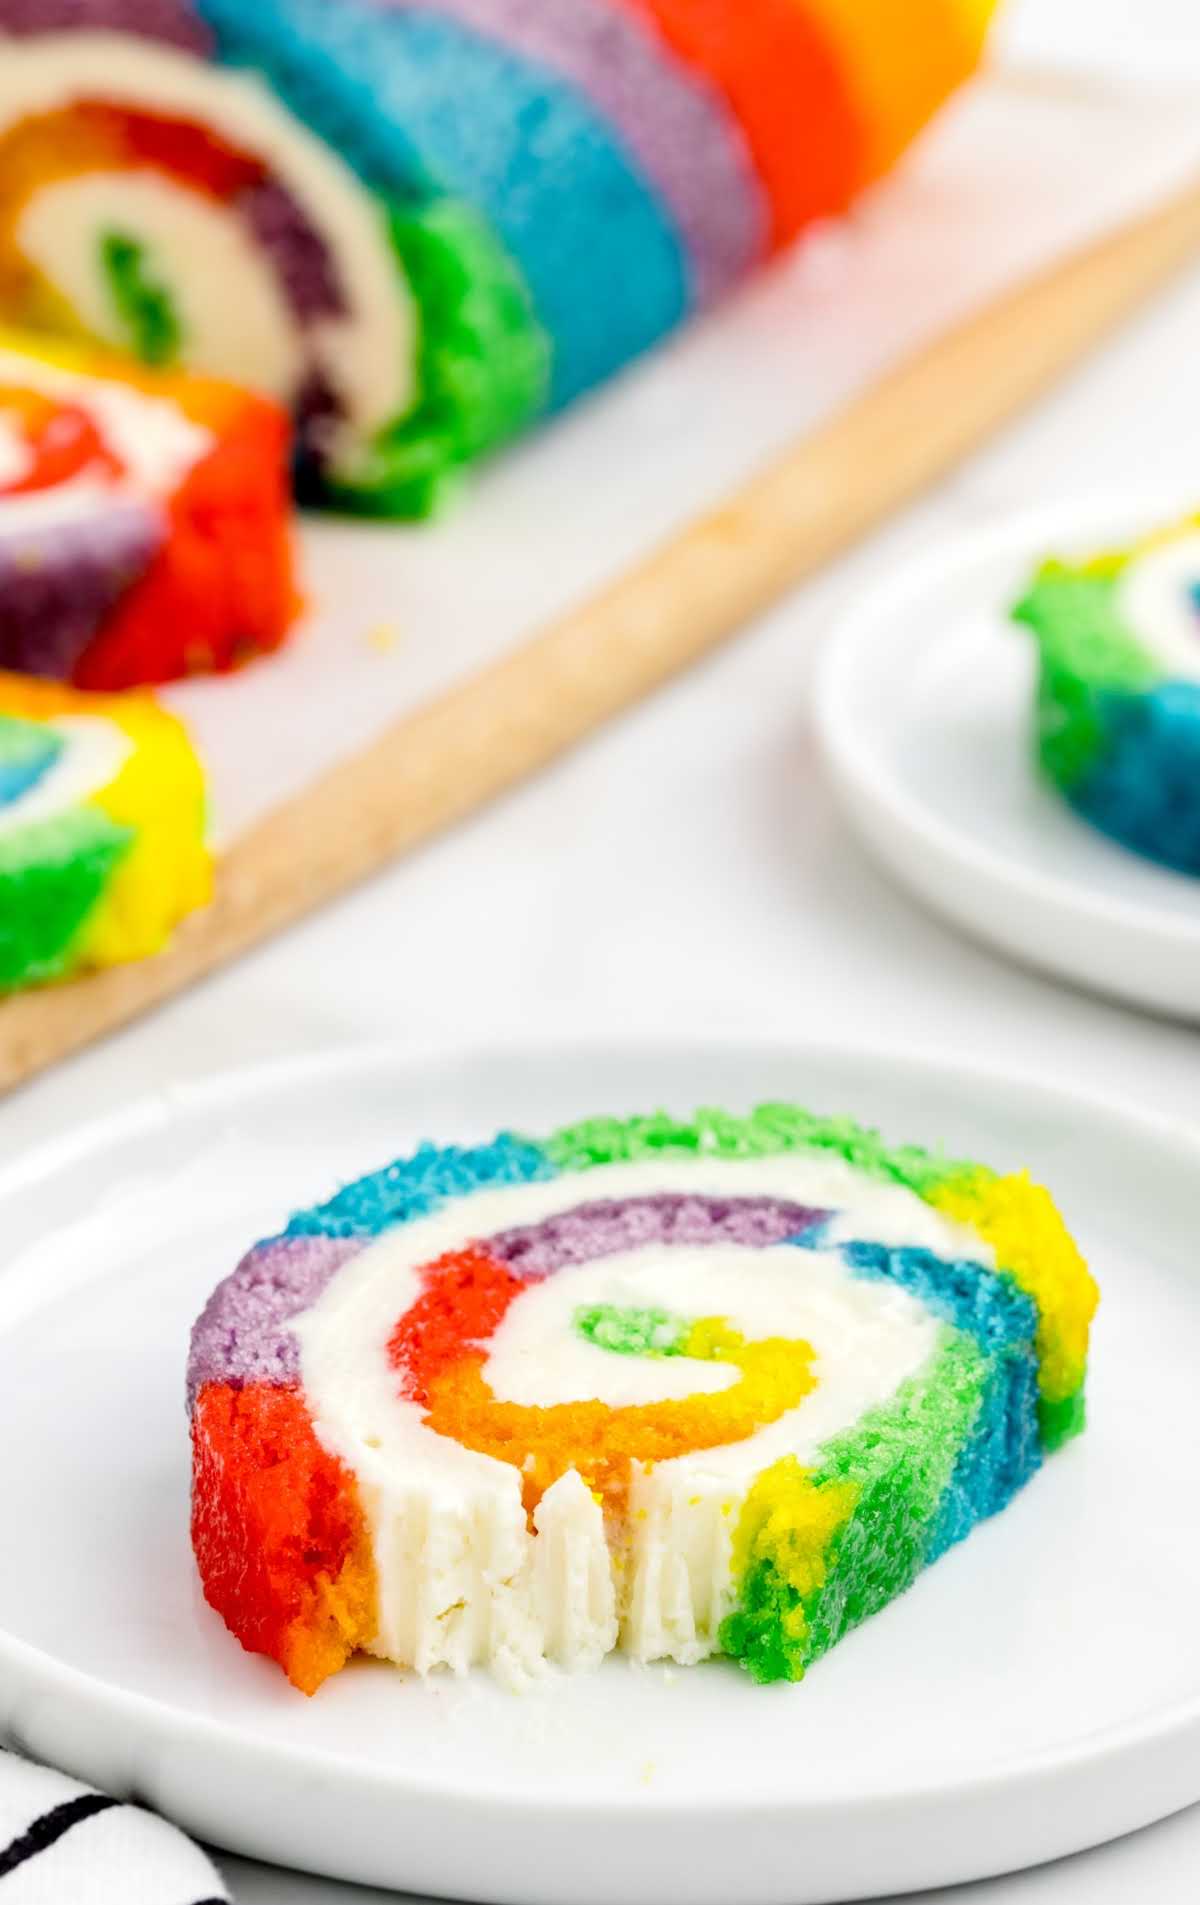 A close up of a plate of birthday cake, with Rainbow roll cake and Flour